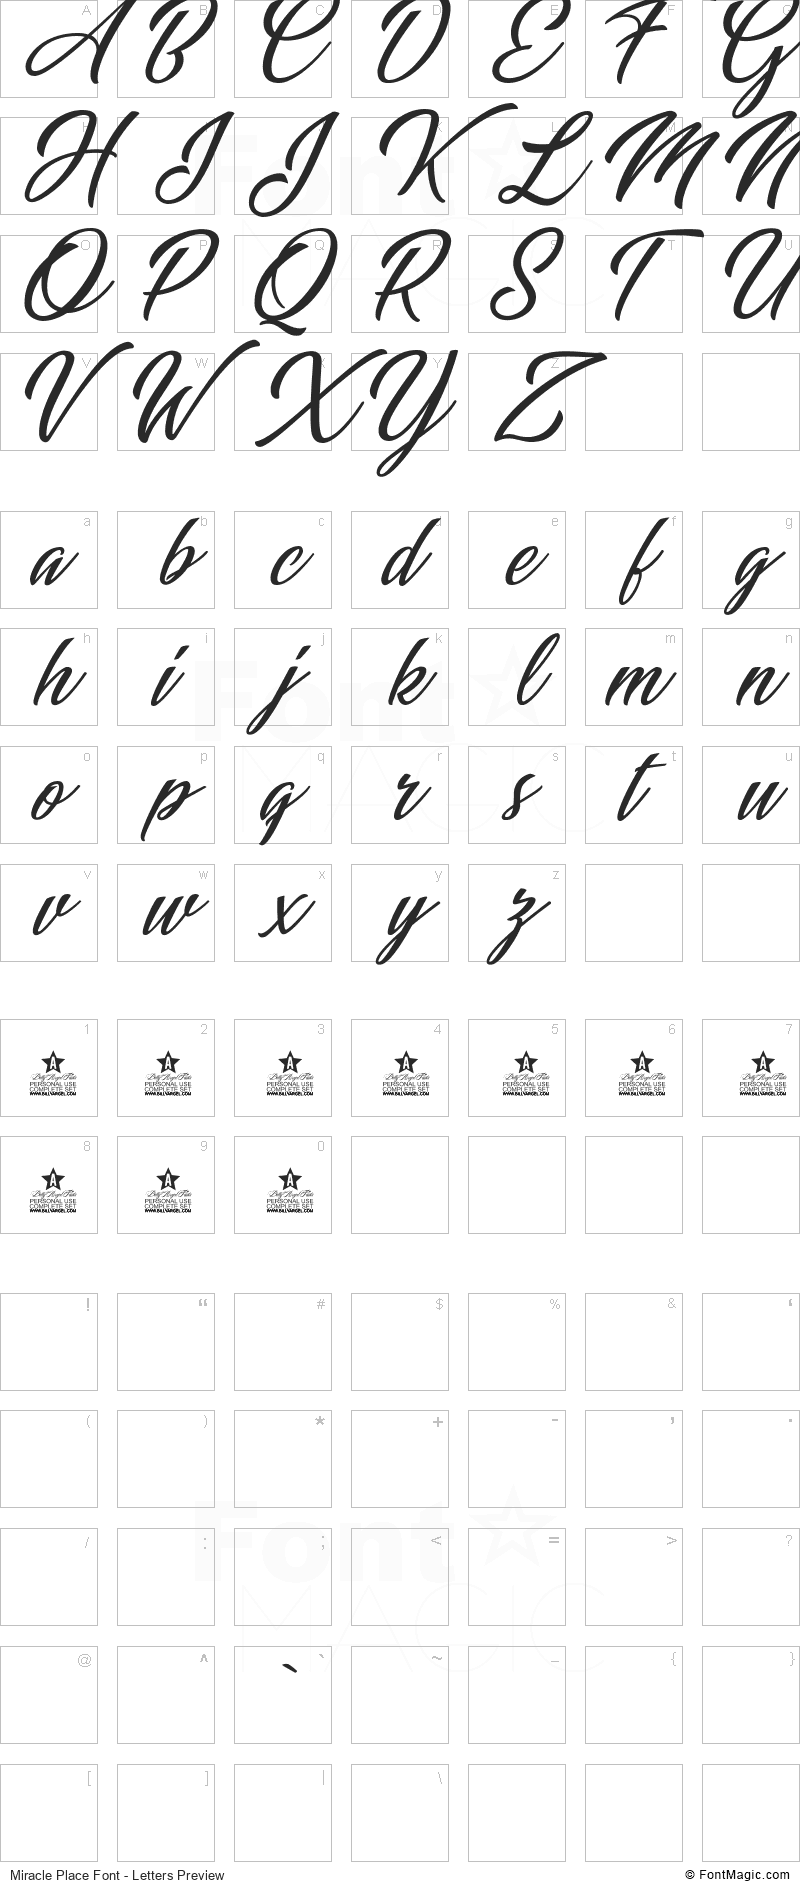 Miracle Place Font - All Latters Preview Chart